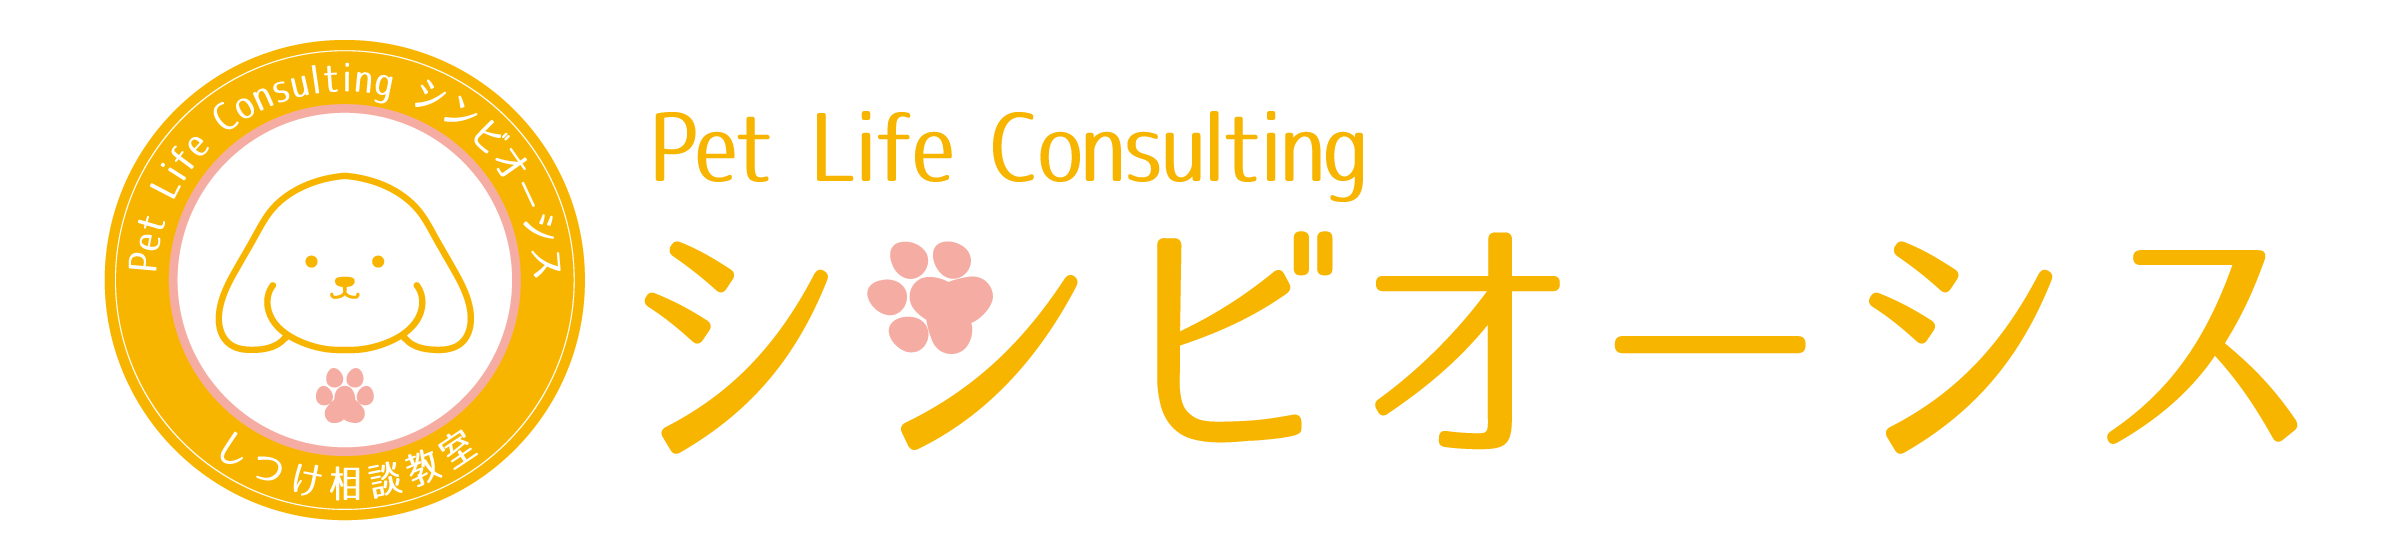 Pet Life Consulting シンビオーシス